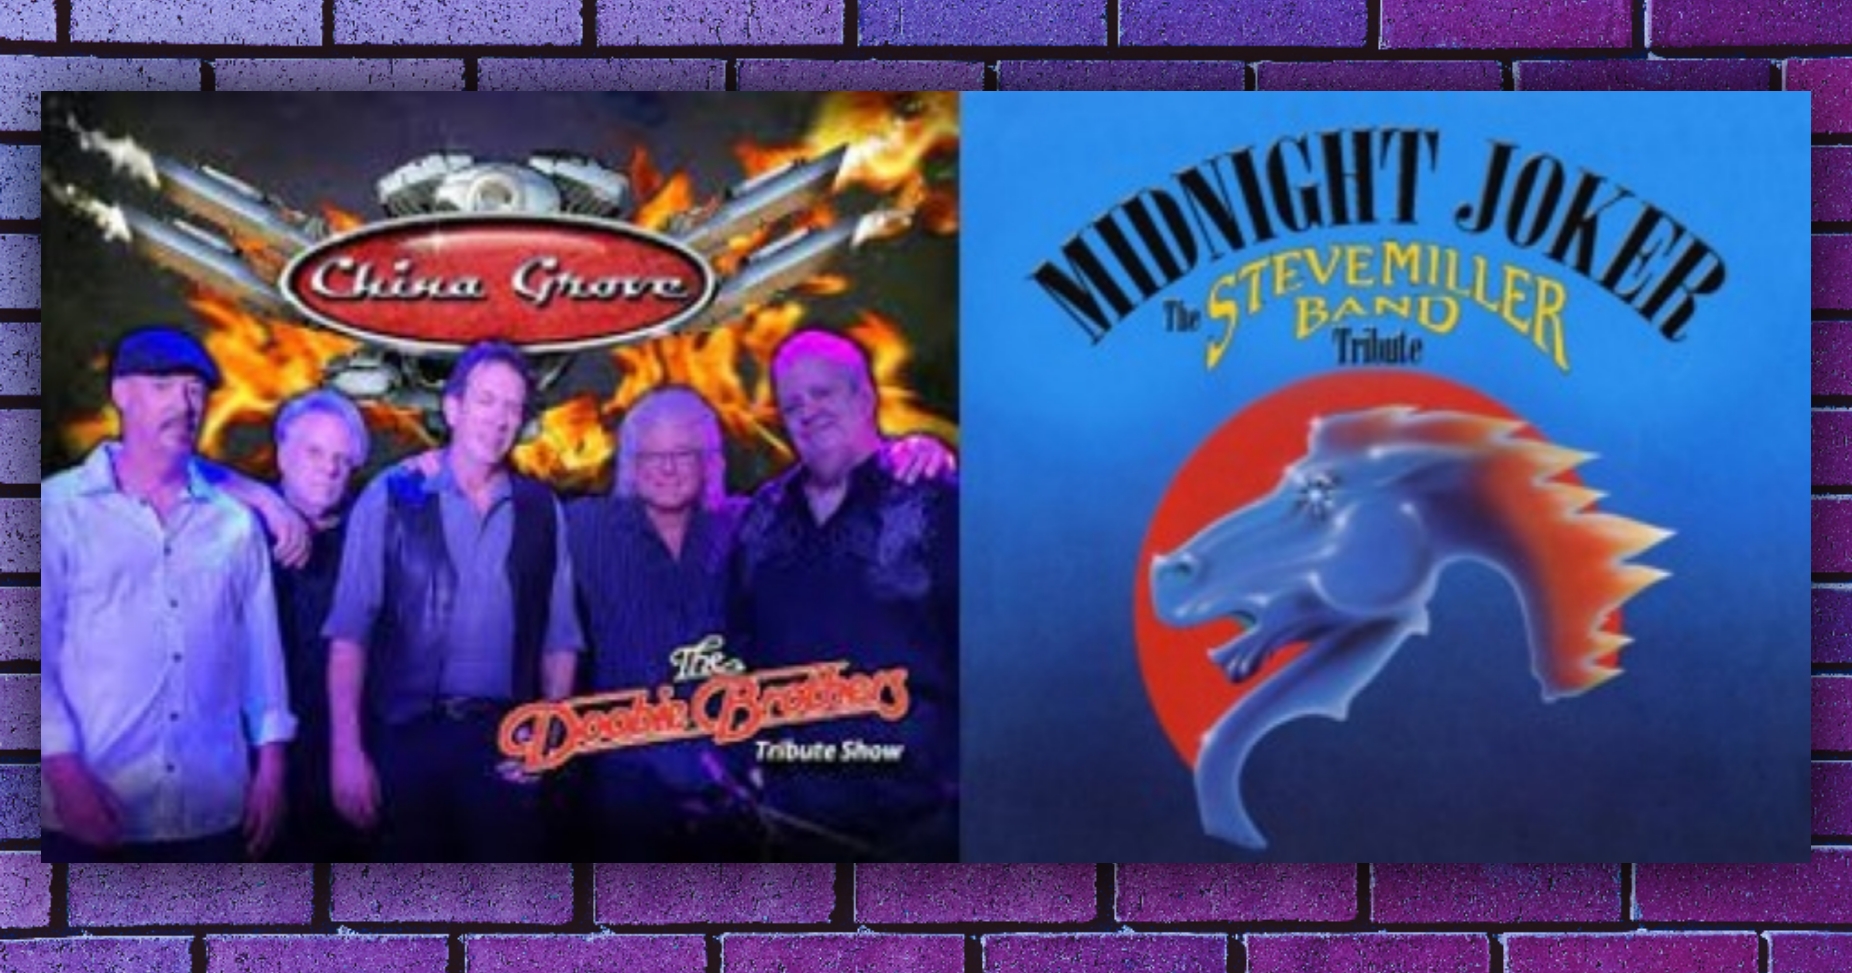 TWO TRIBUTES - ONE AFTERNOON!: Midnight Joker (Tribute to The Steve Miller Band) AND China Grove (Tribute to The Doobie Brothers) !!